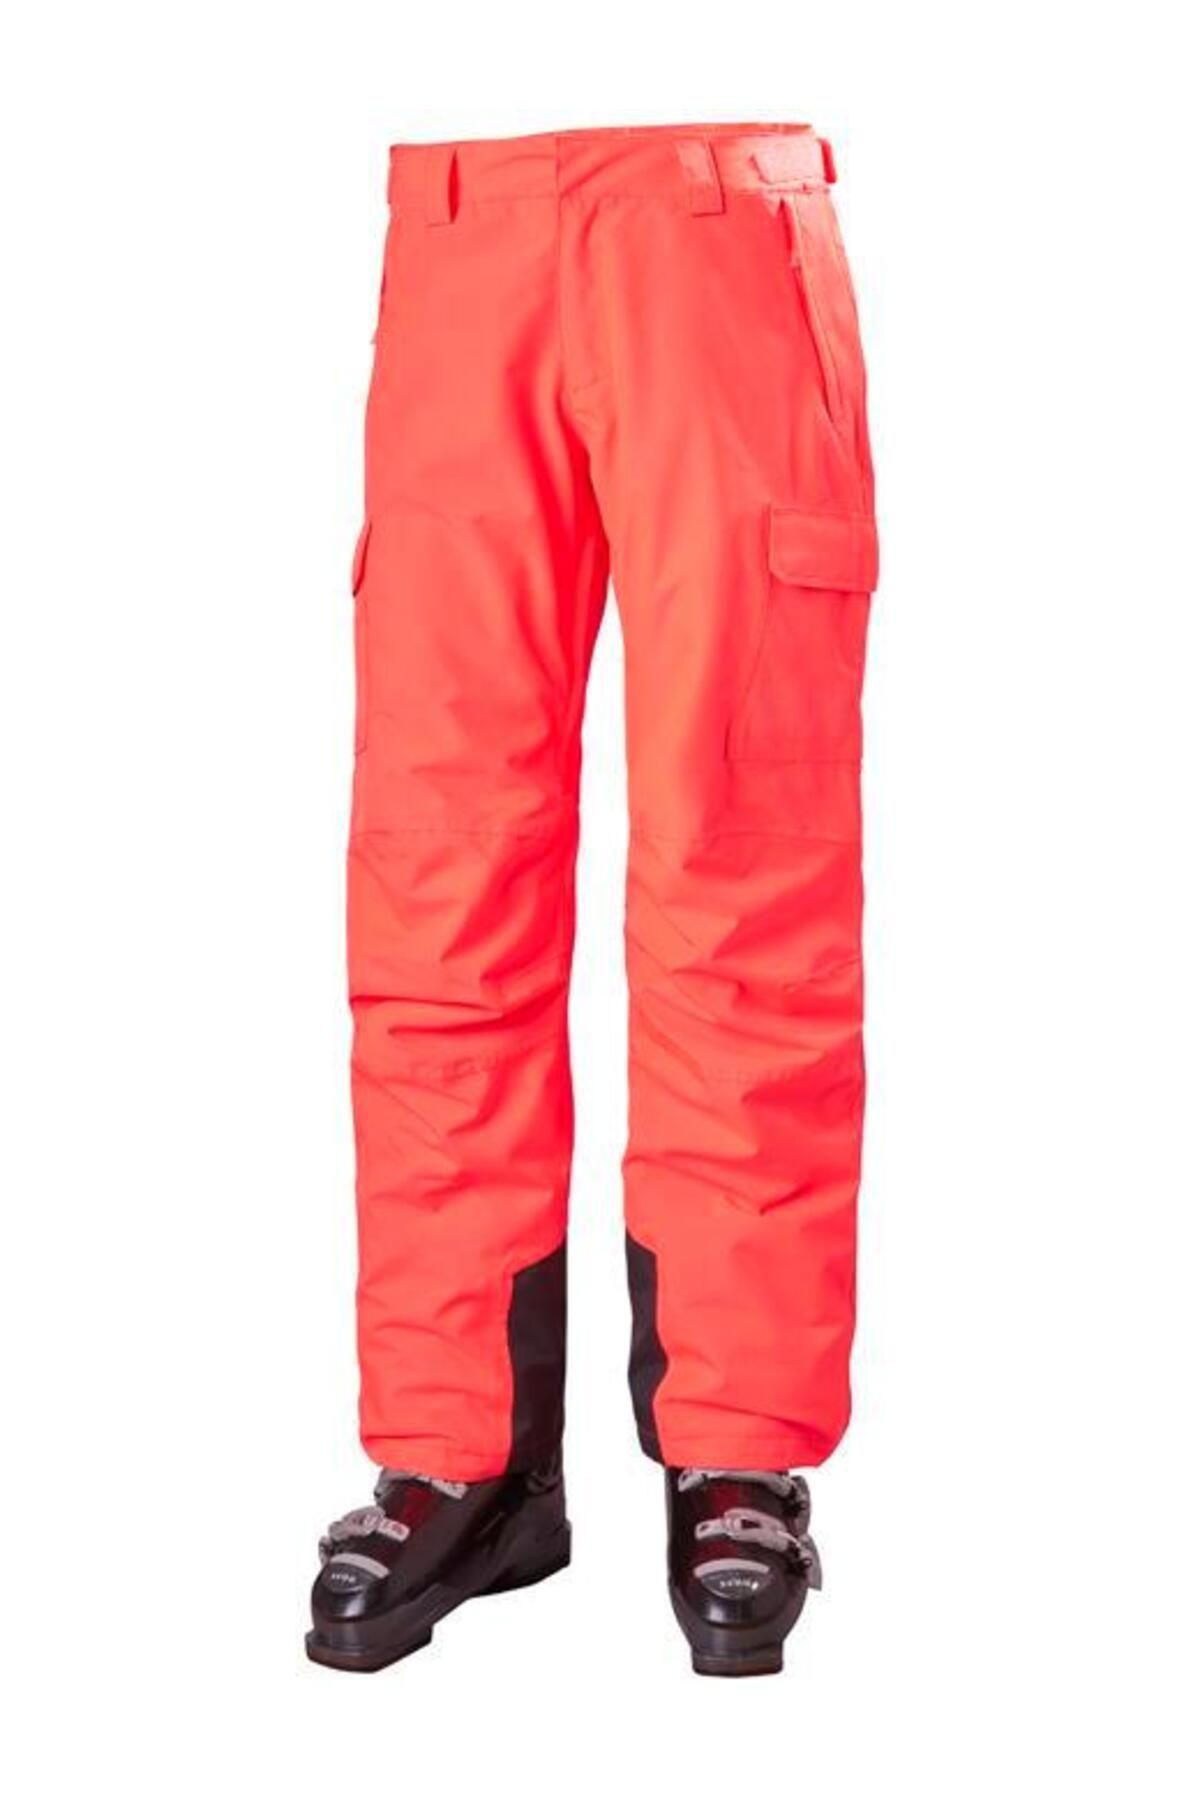 Helly Hansen Hh W Swıtch Cargo Insulated Pant